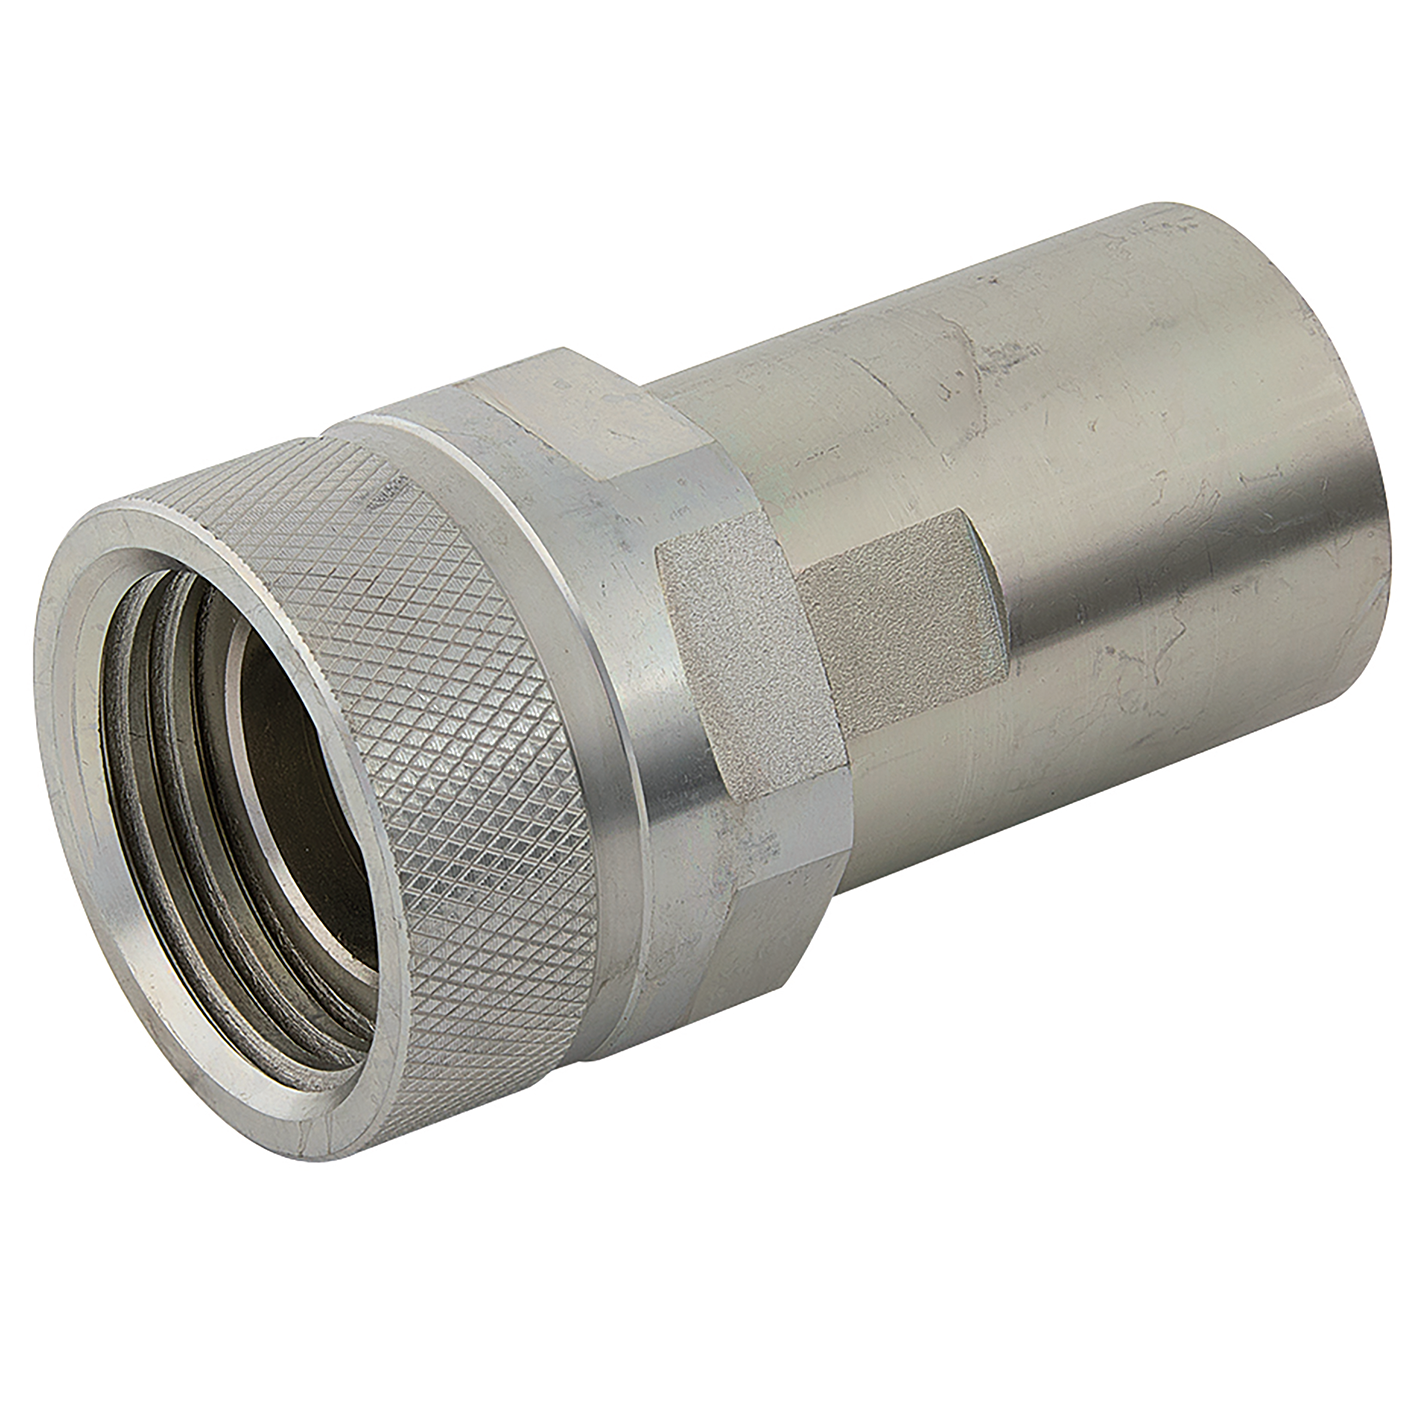 3/4" BSPP Female Hydraulic Quick Release Coupling